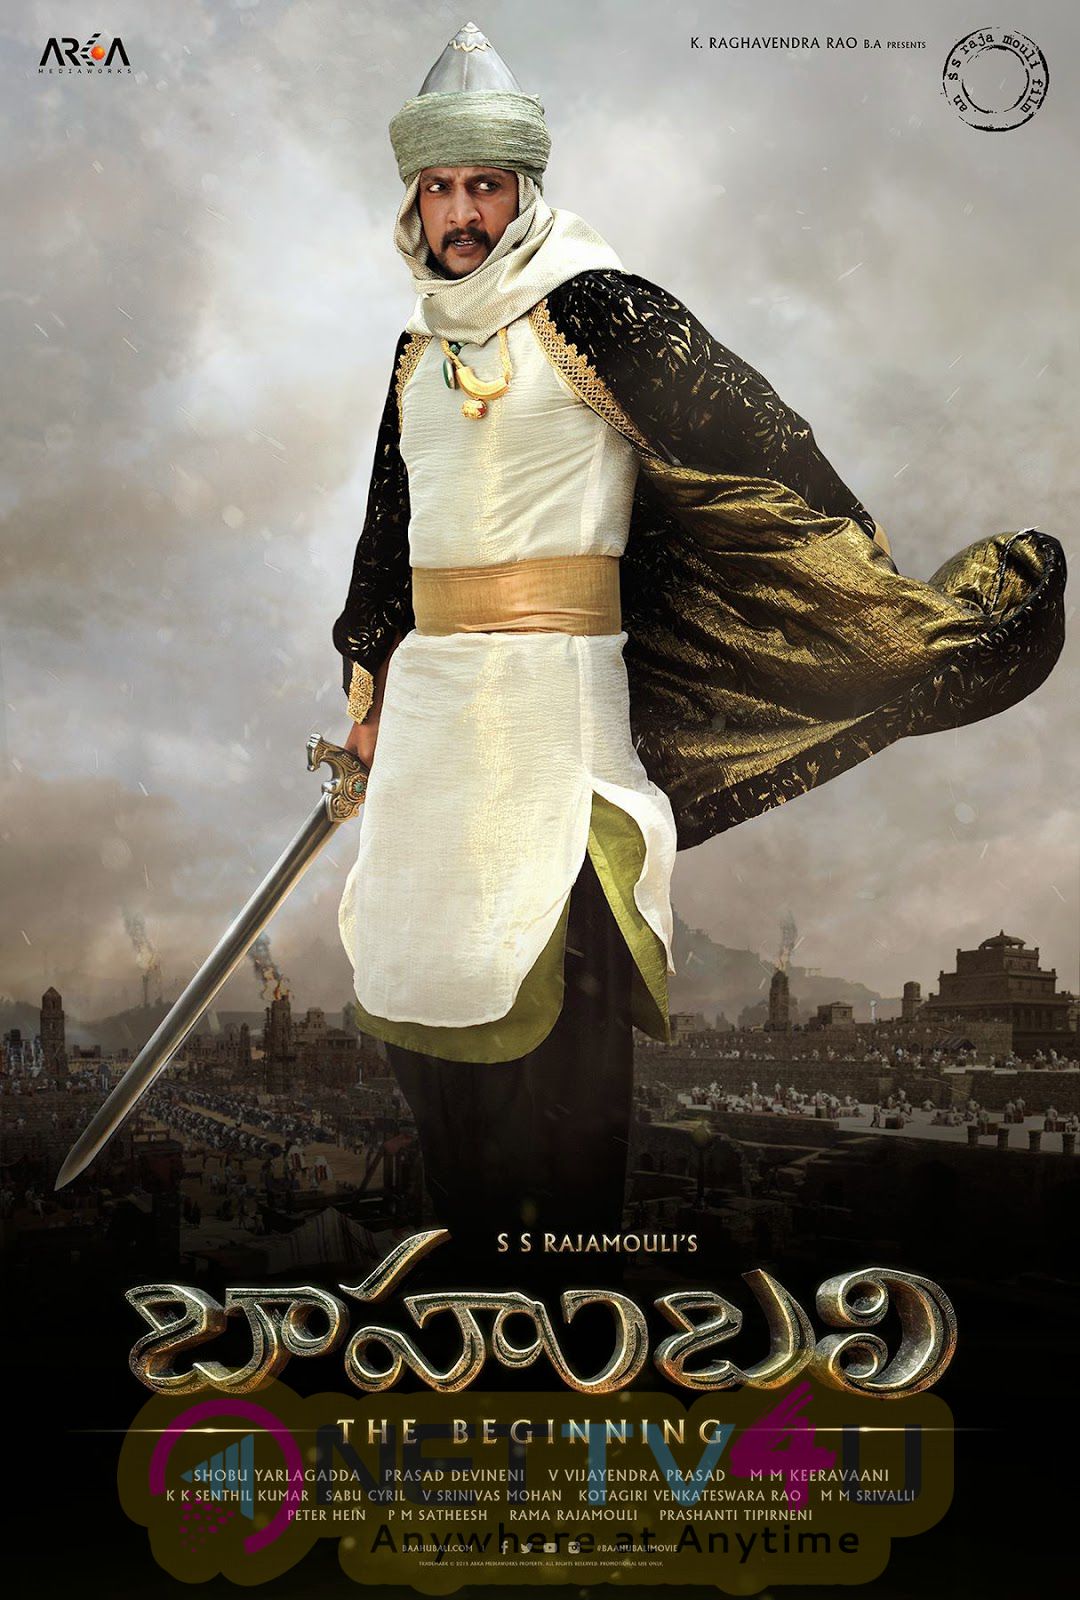 wallpapers and posters for baahubali telugu movie 30 days 3